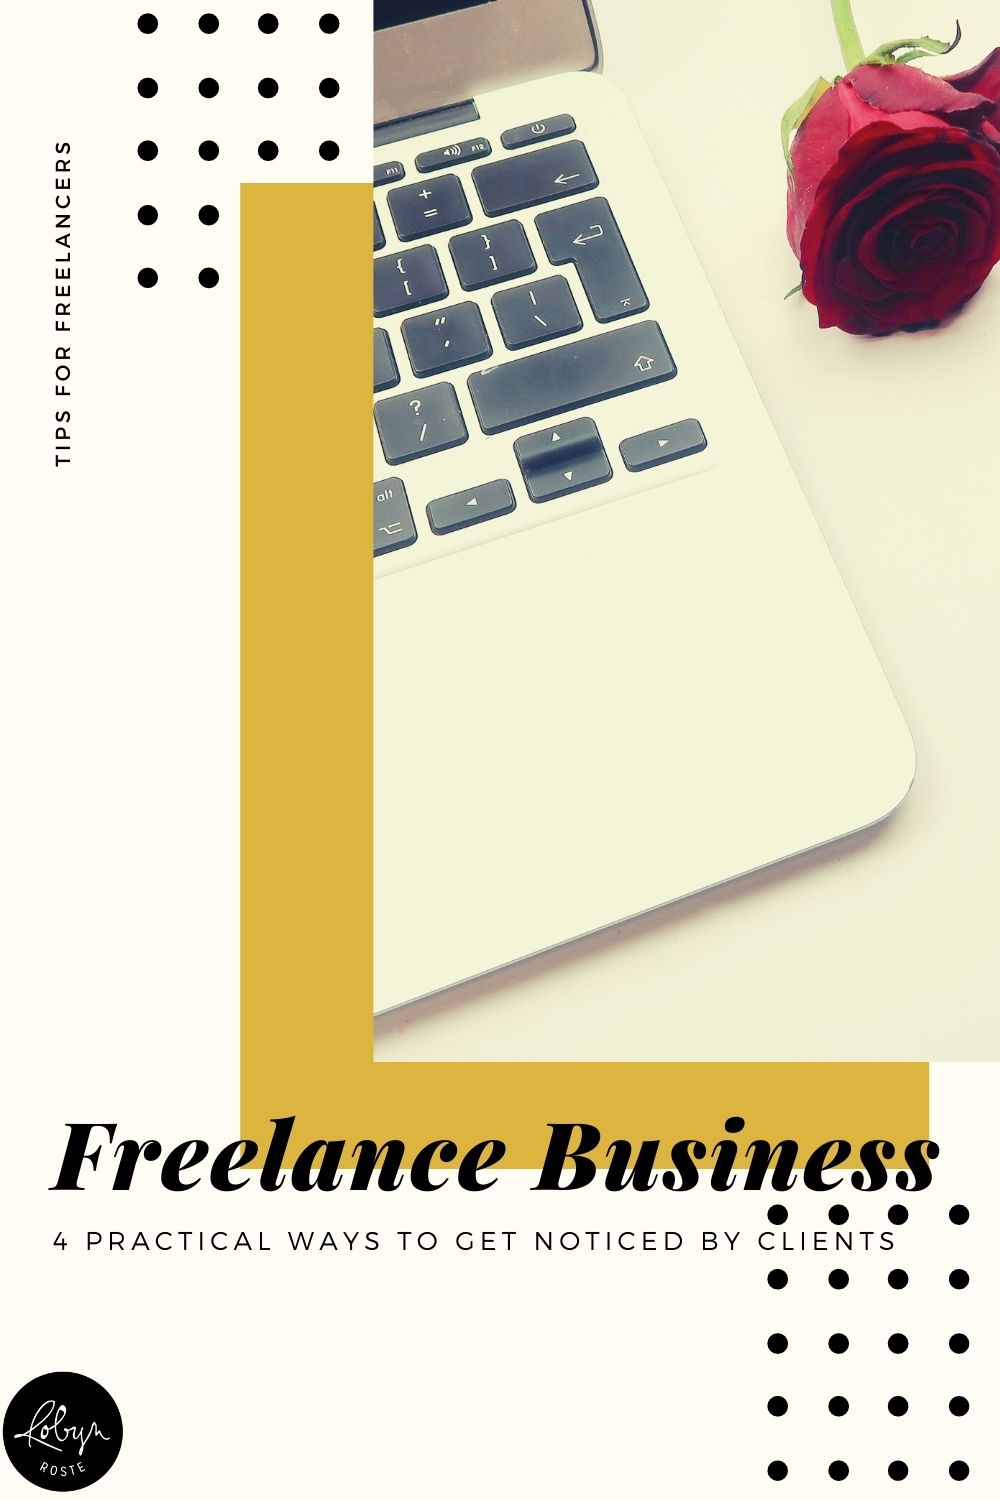 Whether you're new to freelancing or a vetran ready to streamline your client base, getting your freelance business noticed is more important than ever.